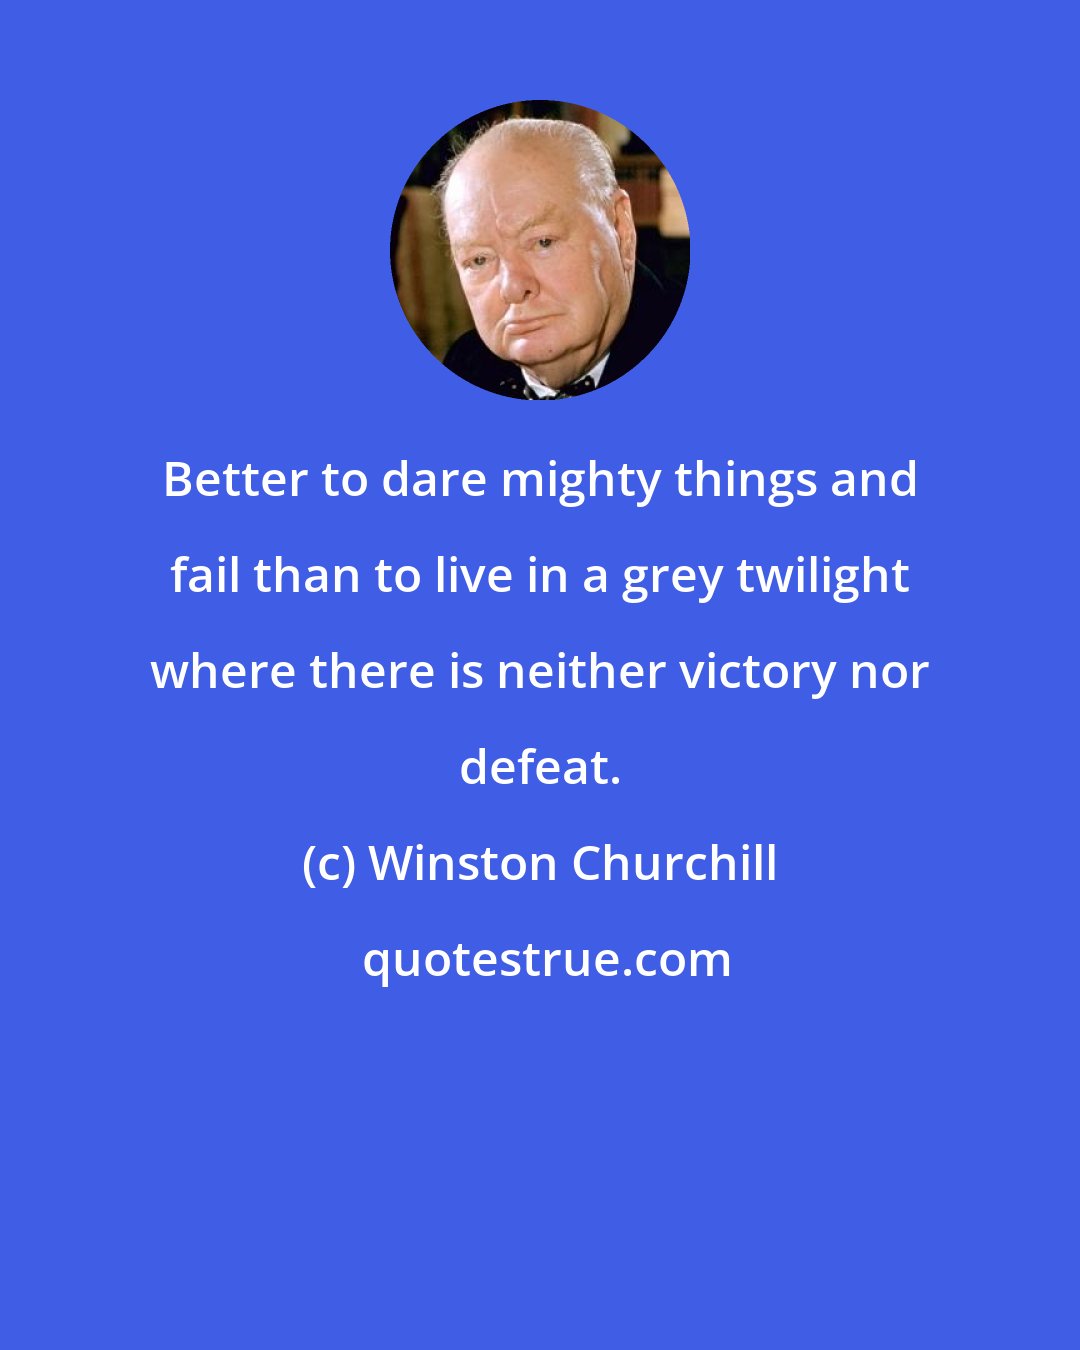 Winston Churchill: Better to dare mighty things and fail than to live in a grey twilight where there is neither victory nor defeat.